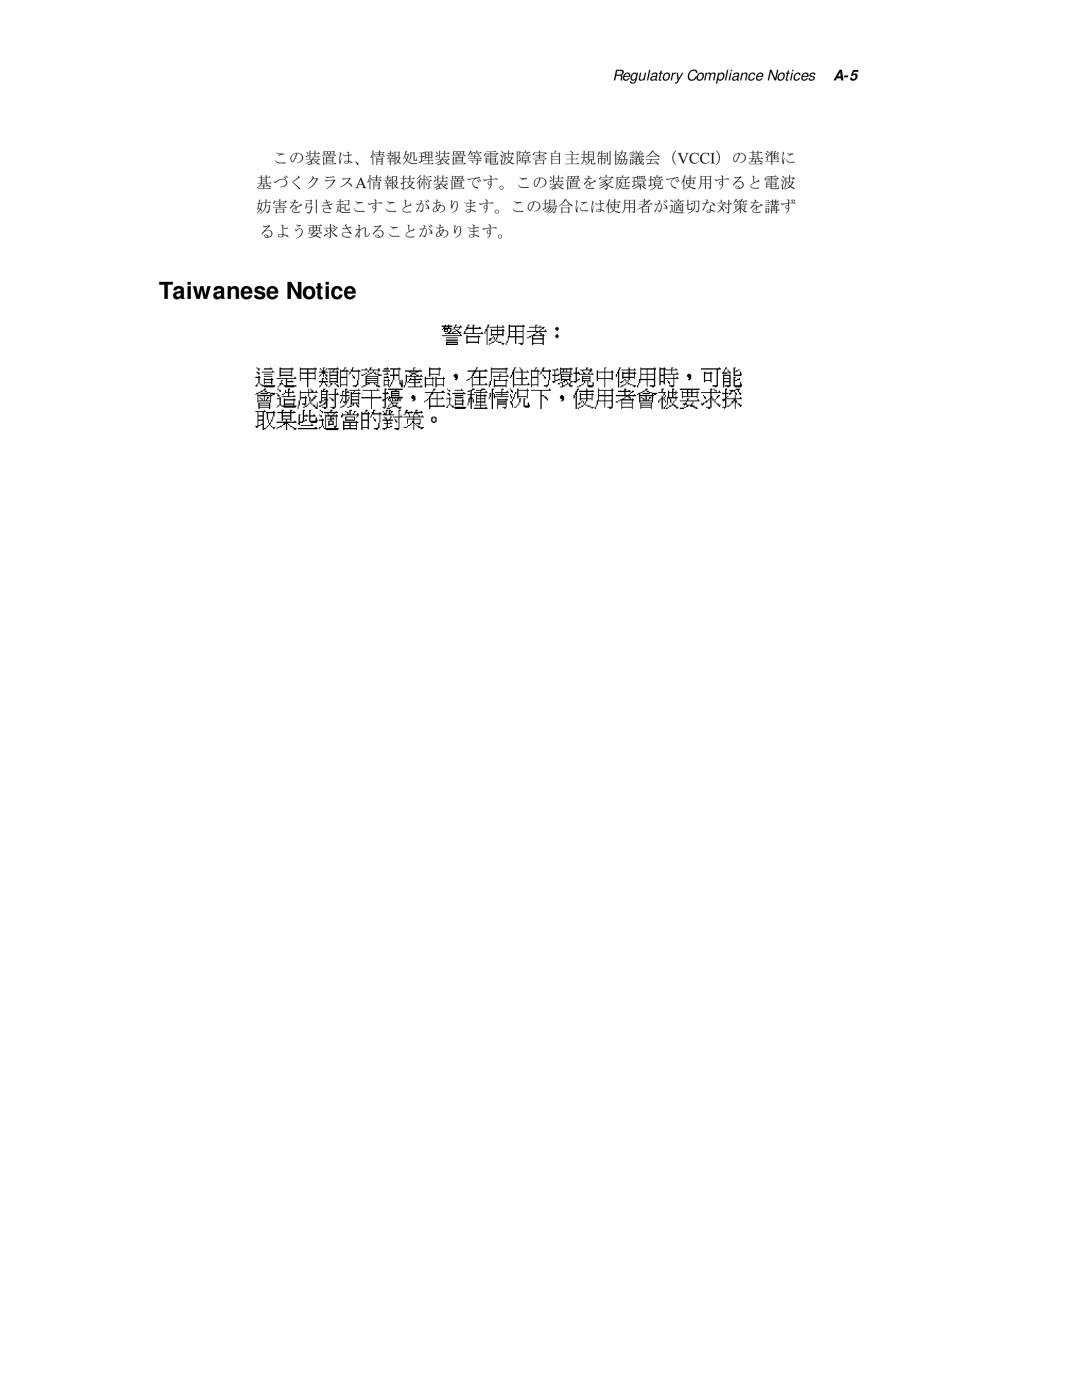 Compaq R6000 Series manual Taiwanese Notice, Regulatory Compliance Notices A-5 